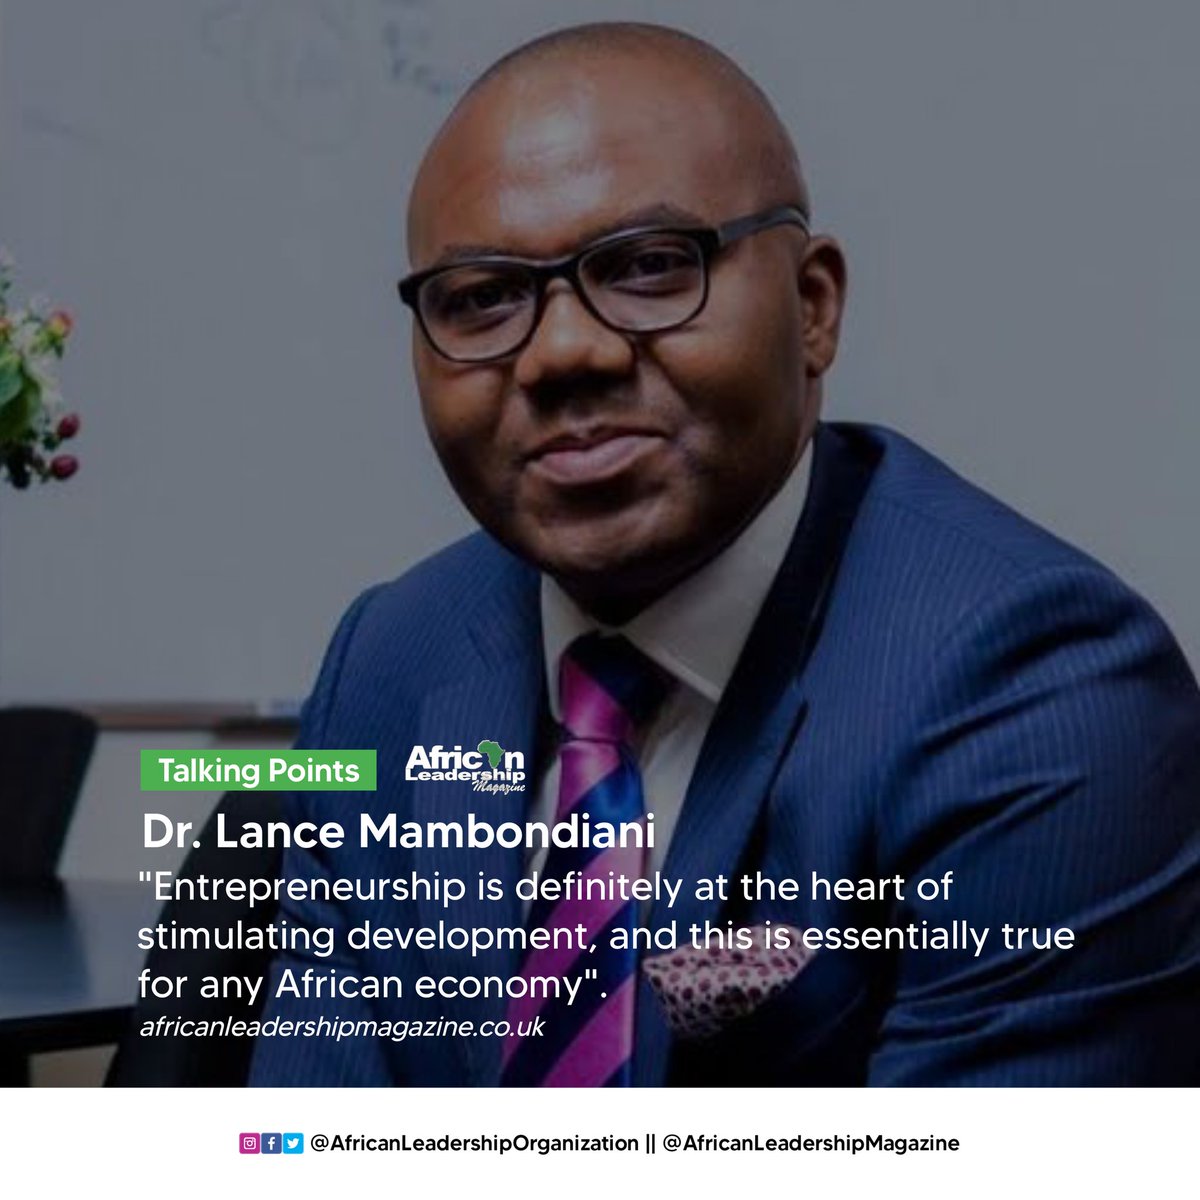 'Entrepreneurship is definitely at the heart of stimulating development, and this is essentially true for any African economy'. - Dr. Lance Mambondiani